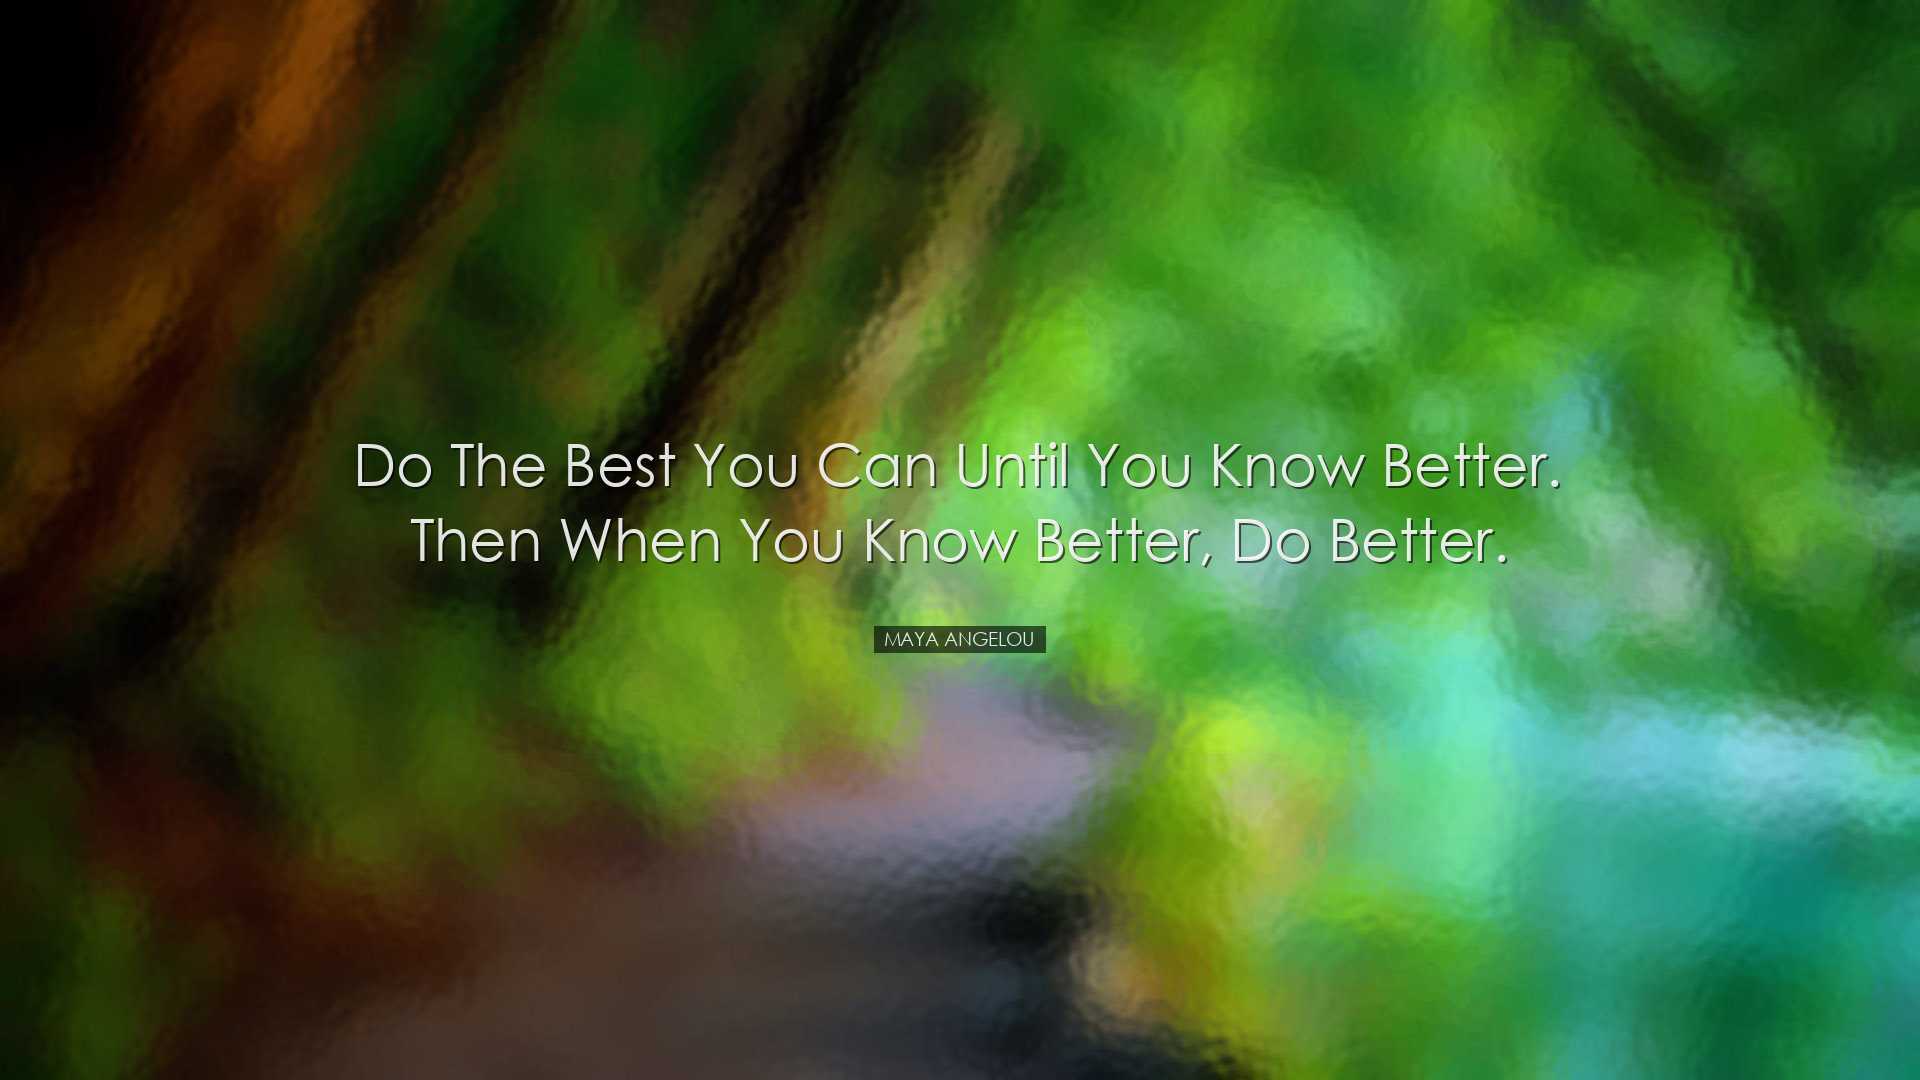 Do the best you can until you know better. Then when you know bett